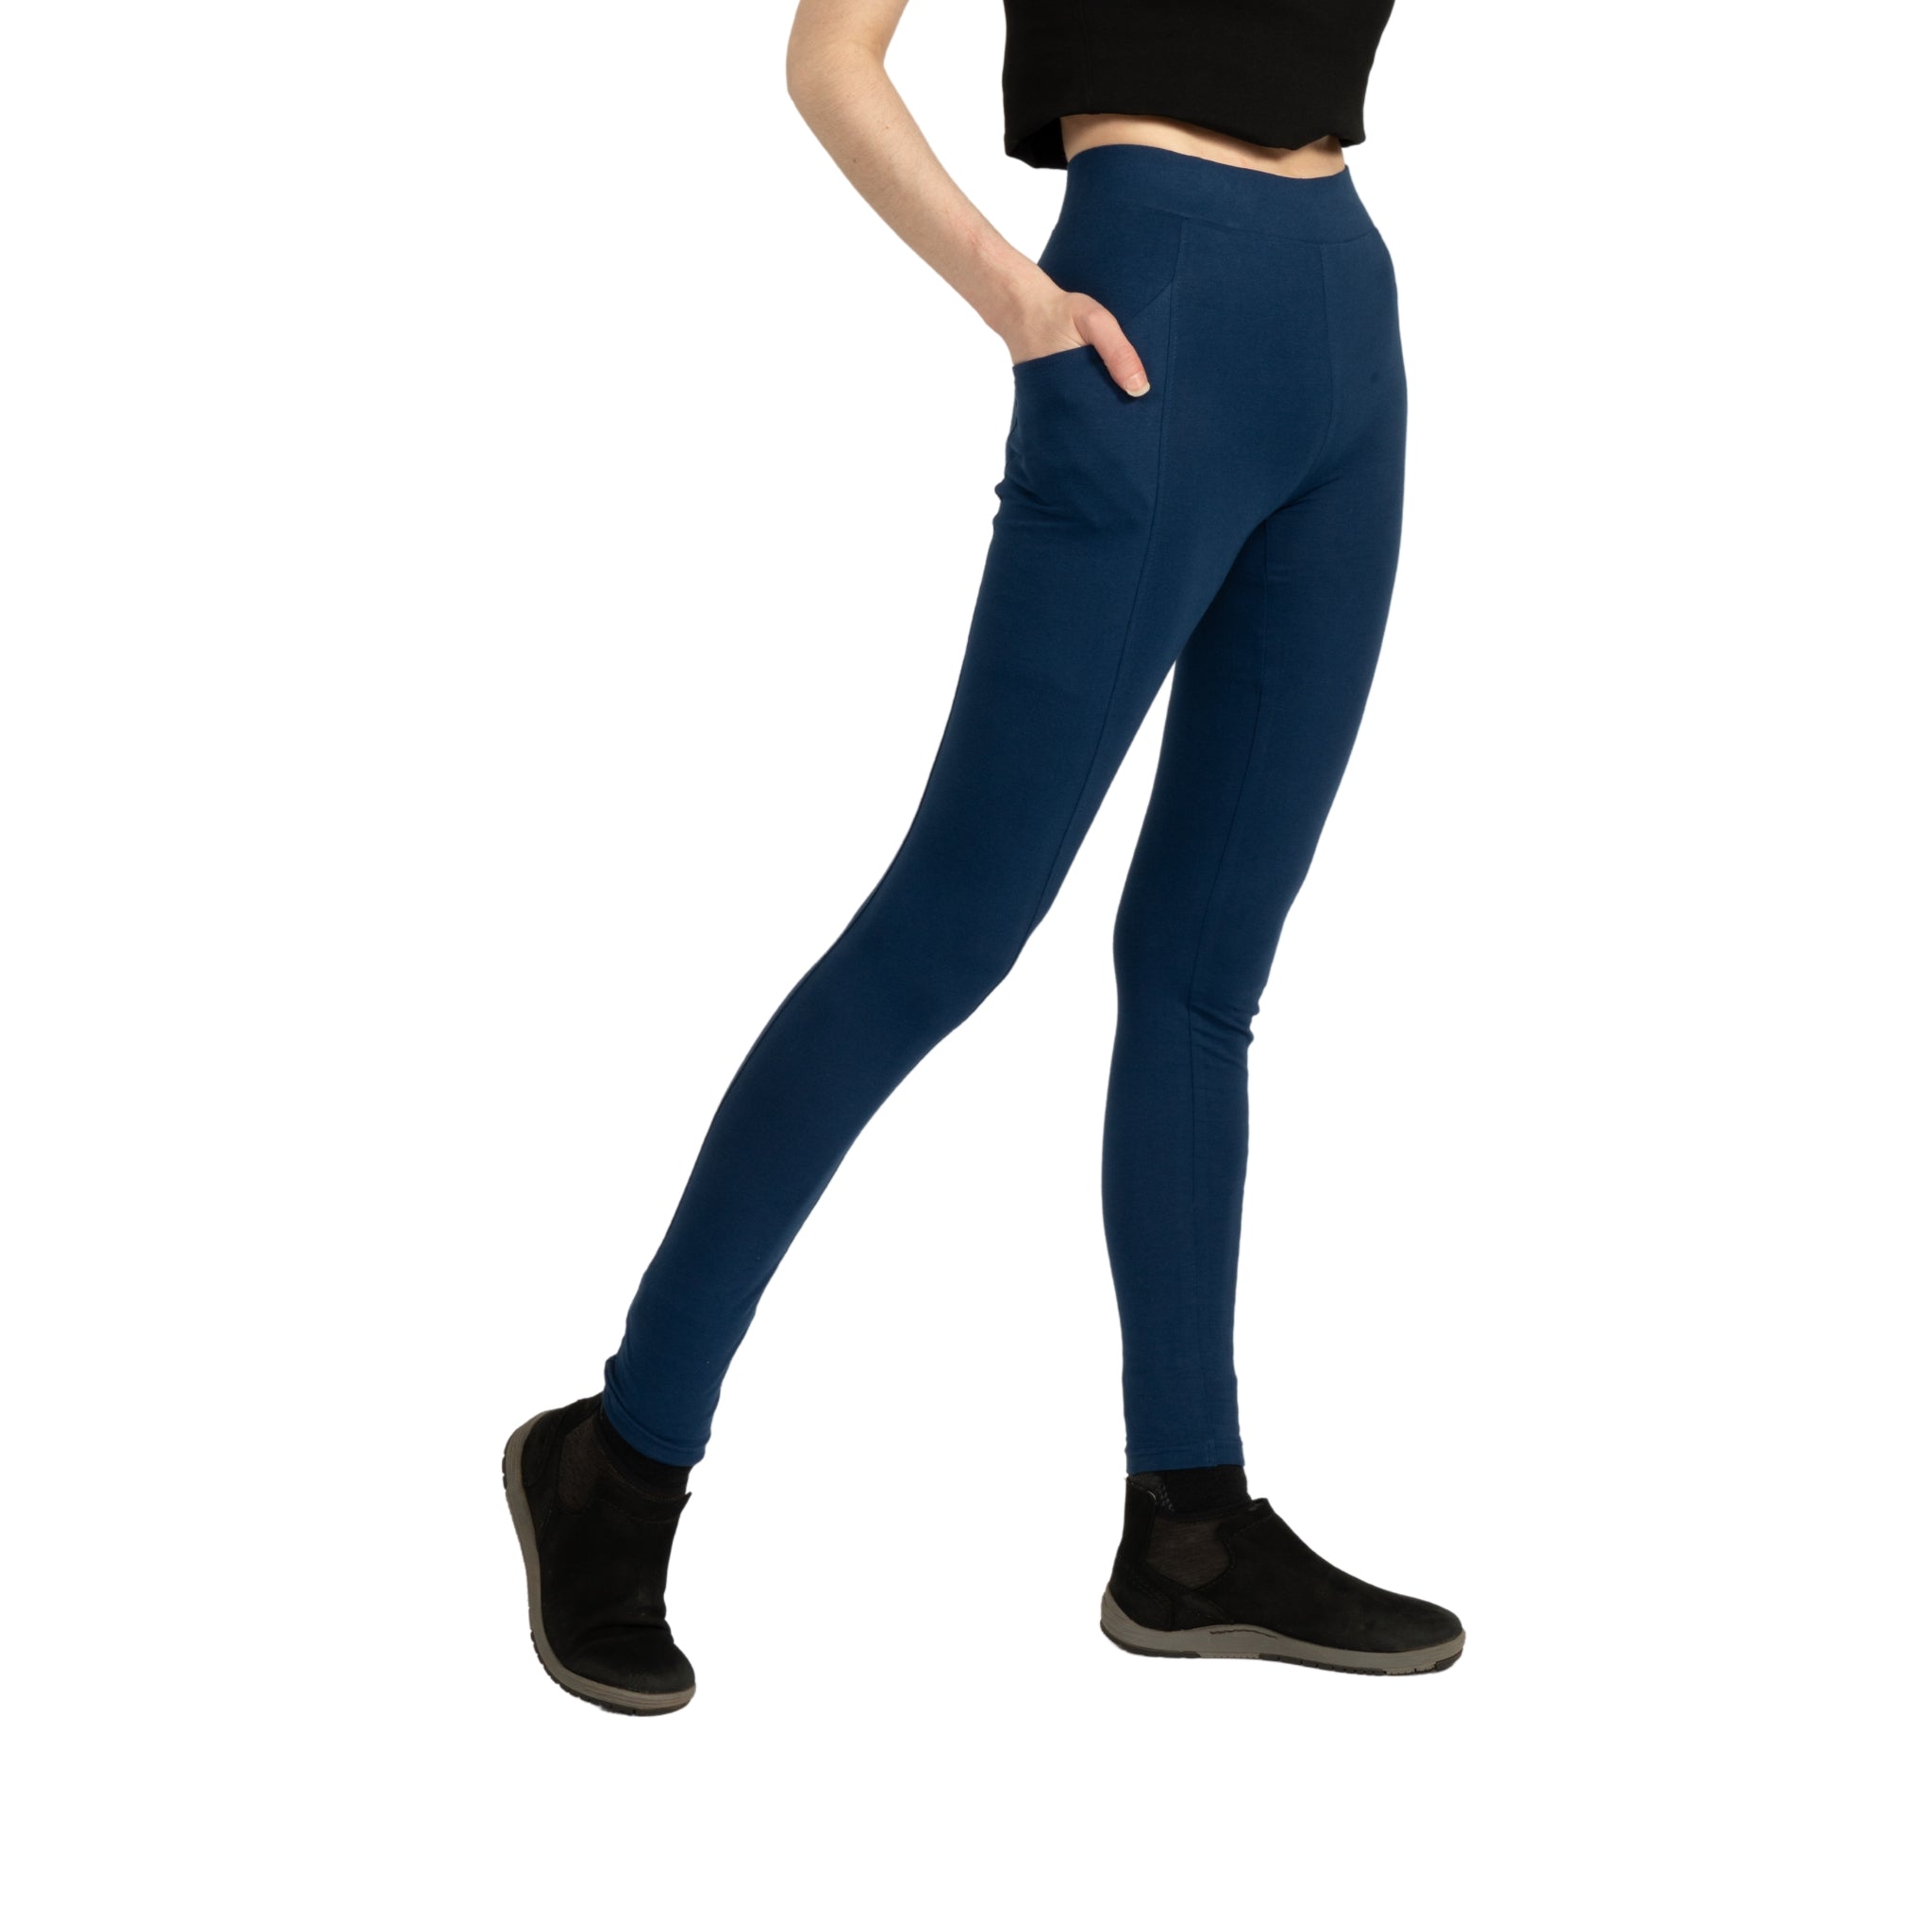 Navy Blue Adults Leggings with Pockets